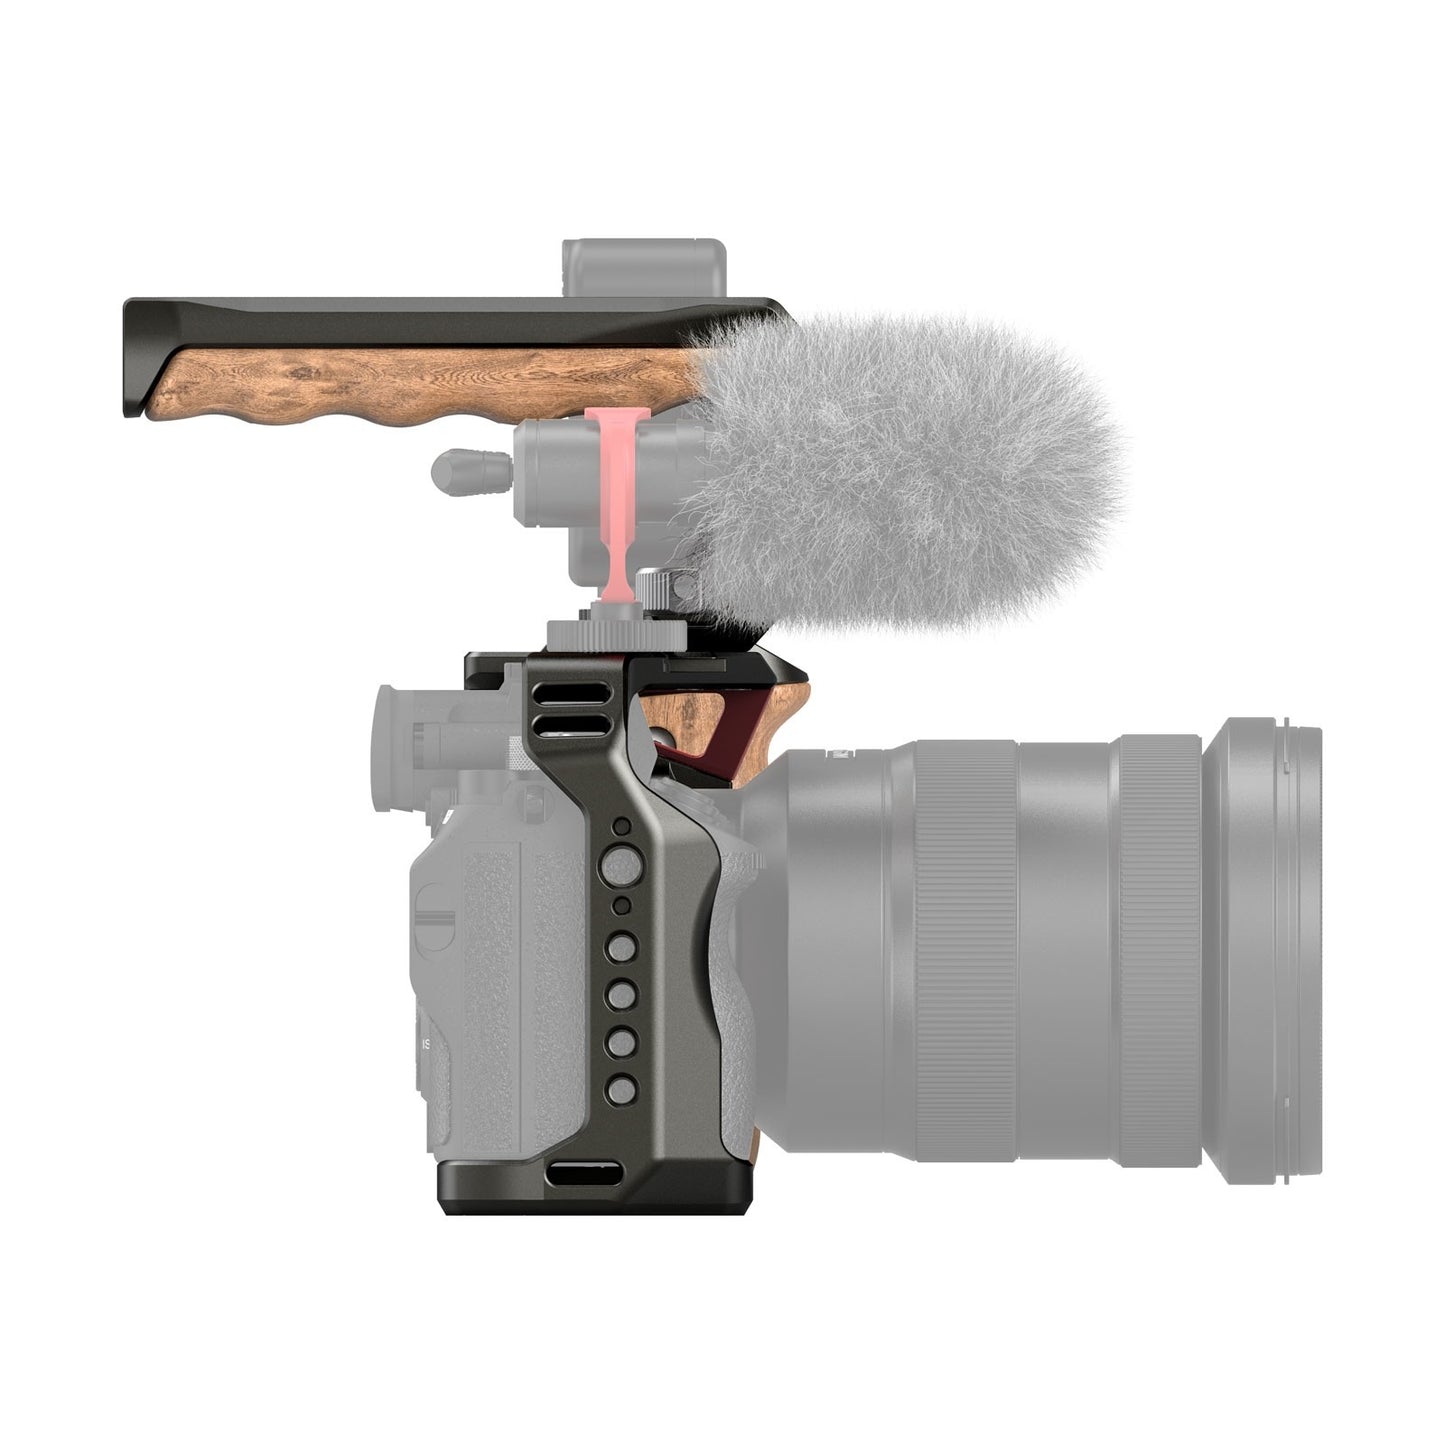 SmallRig New Design Cage Kit for A7 III / A7R III with Side Handle ARRI-Style Mount Aluminum Camera Cage Wood-Lined Top Handle SA0007